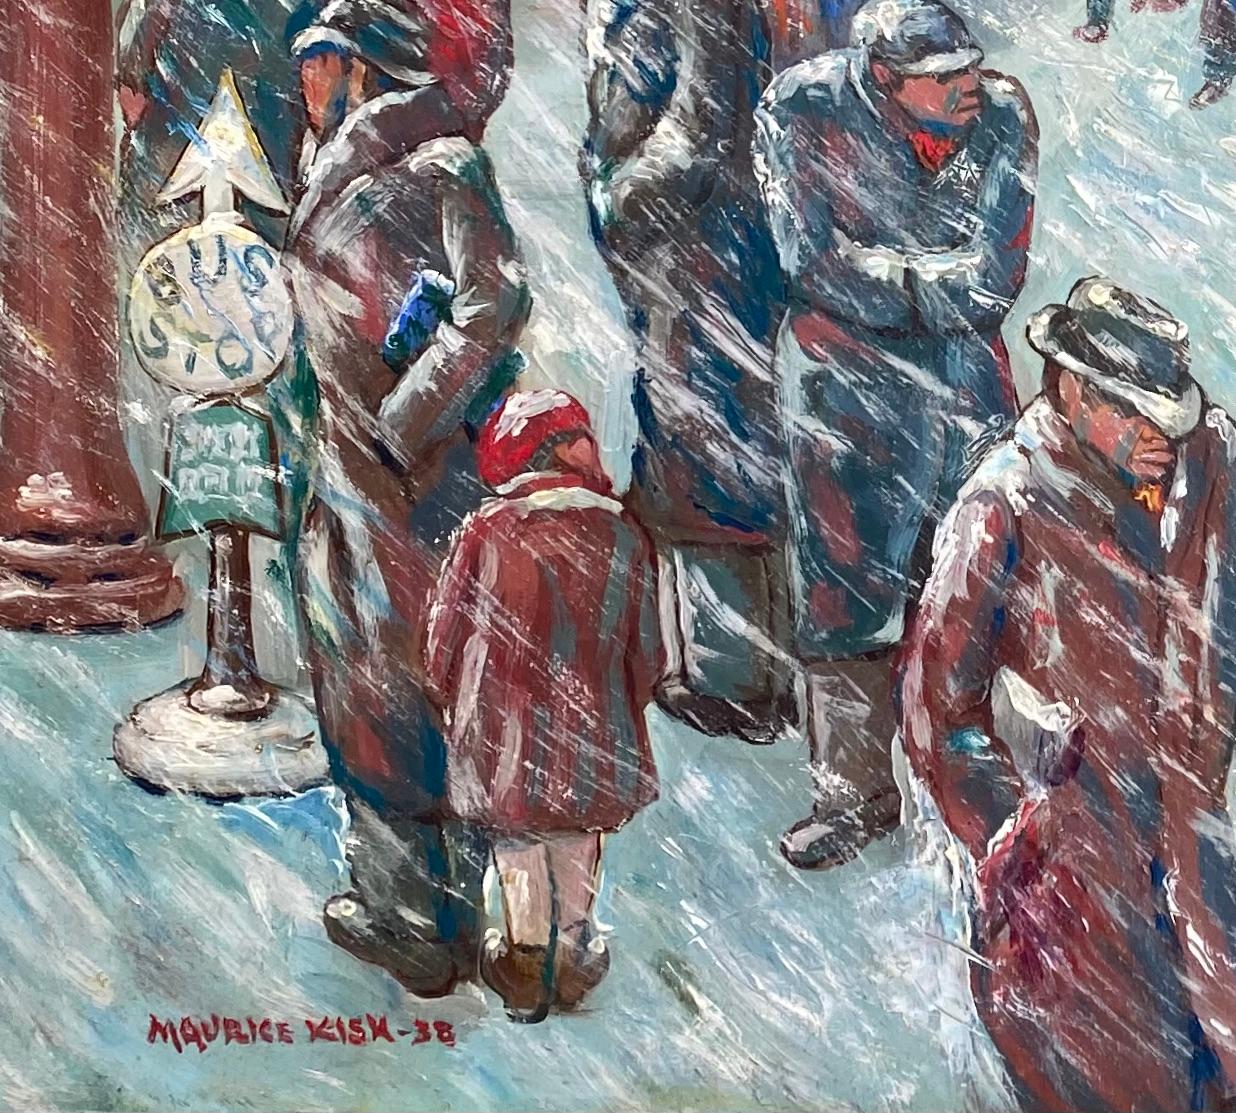 Waiting for the Bus in a Blizzard- WPA American Scene 1938 NYC Modernism Realism - Painting by Maurice Kish